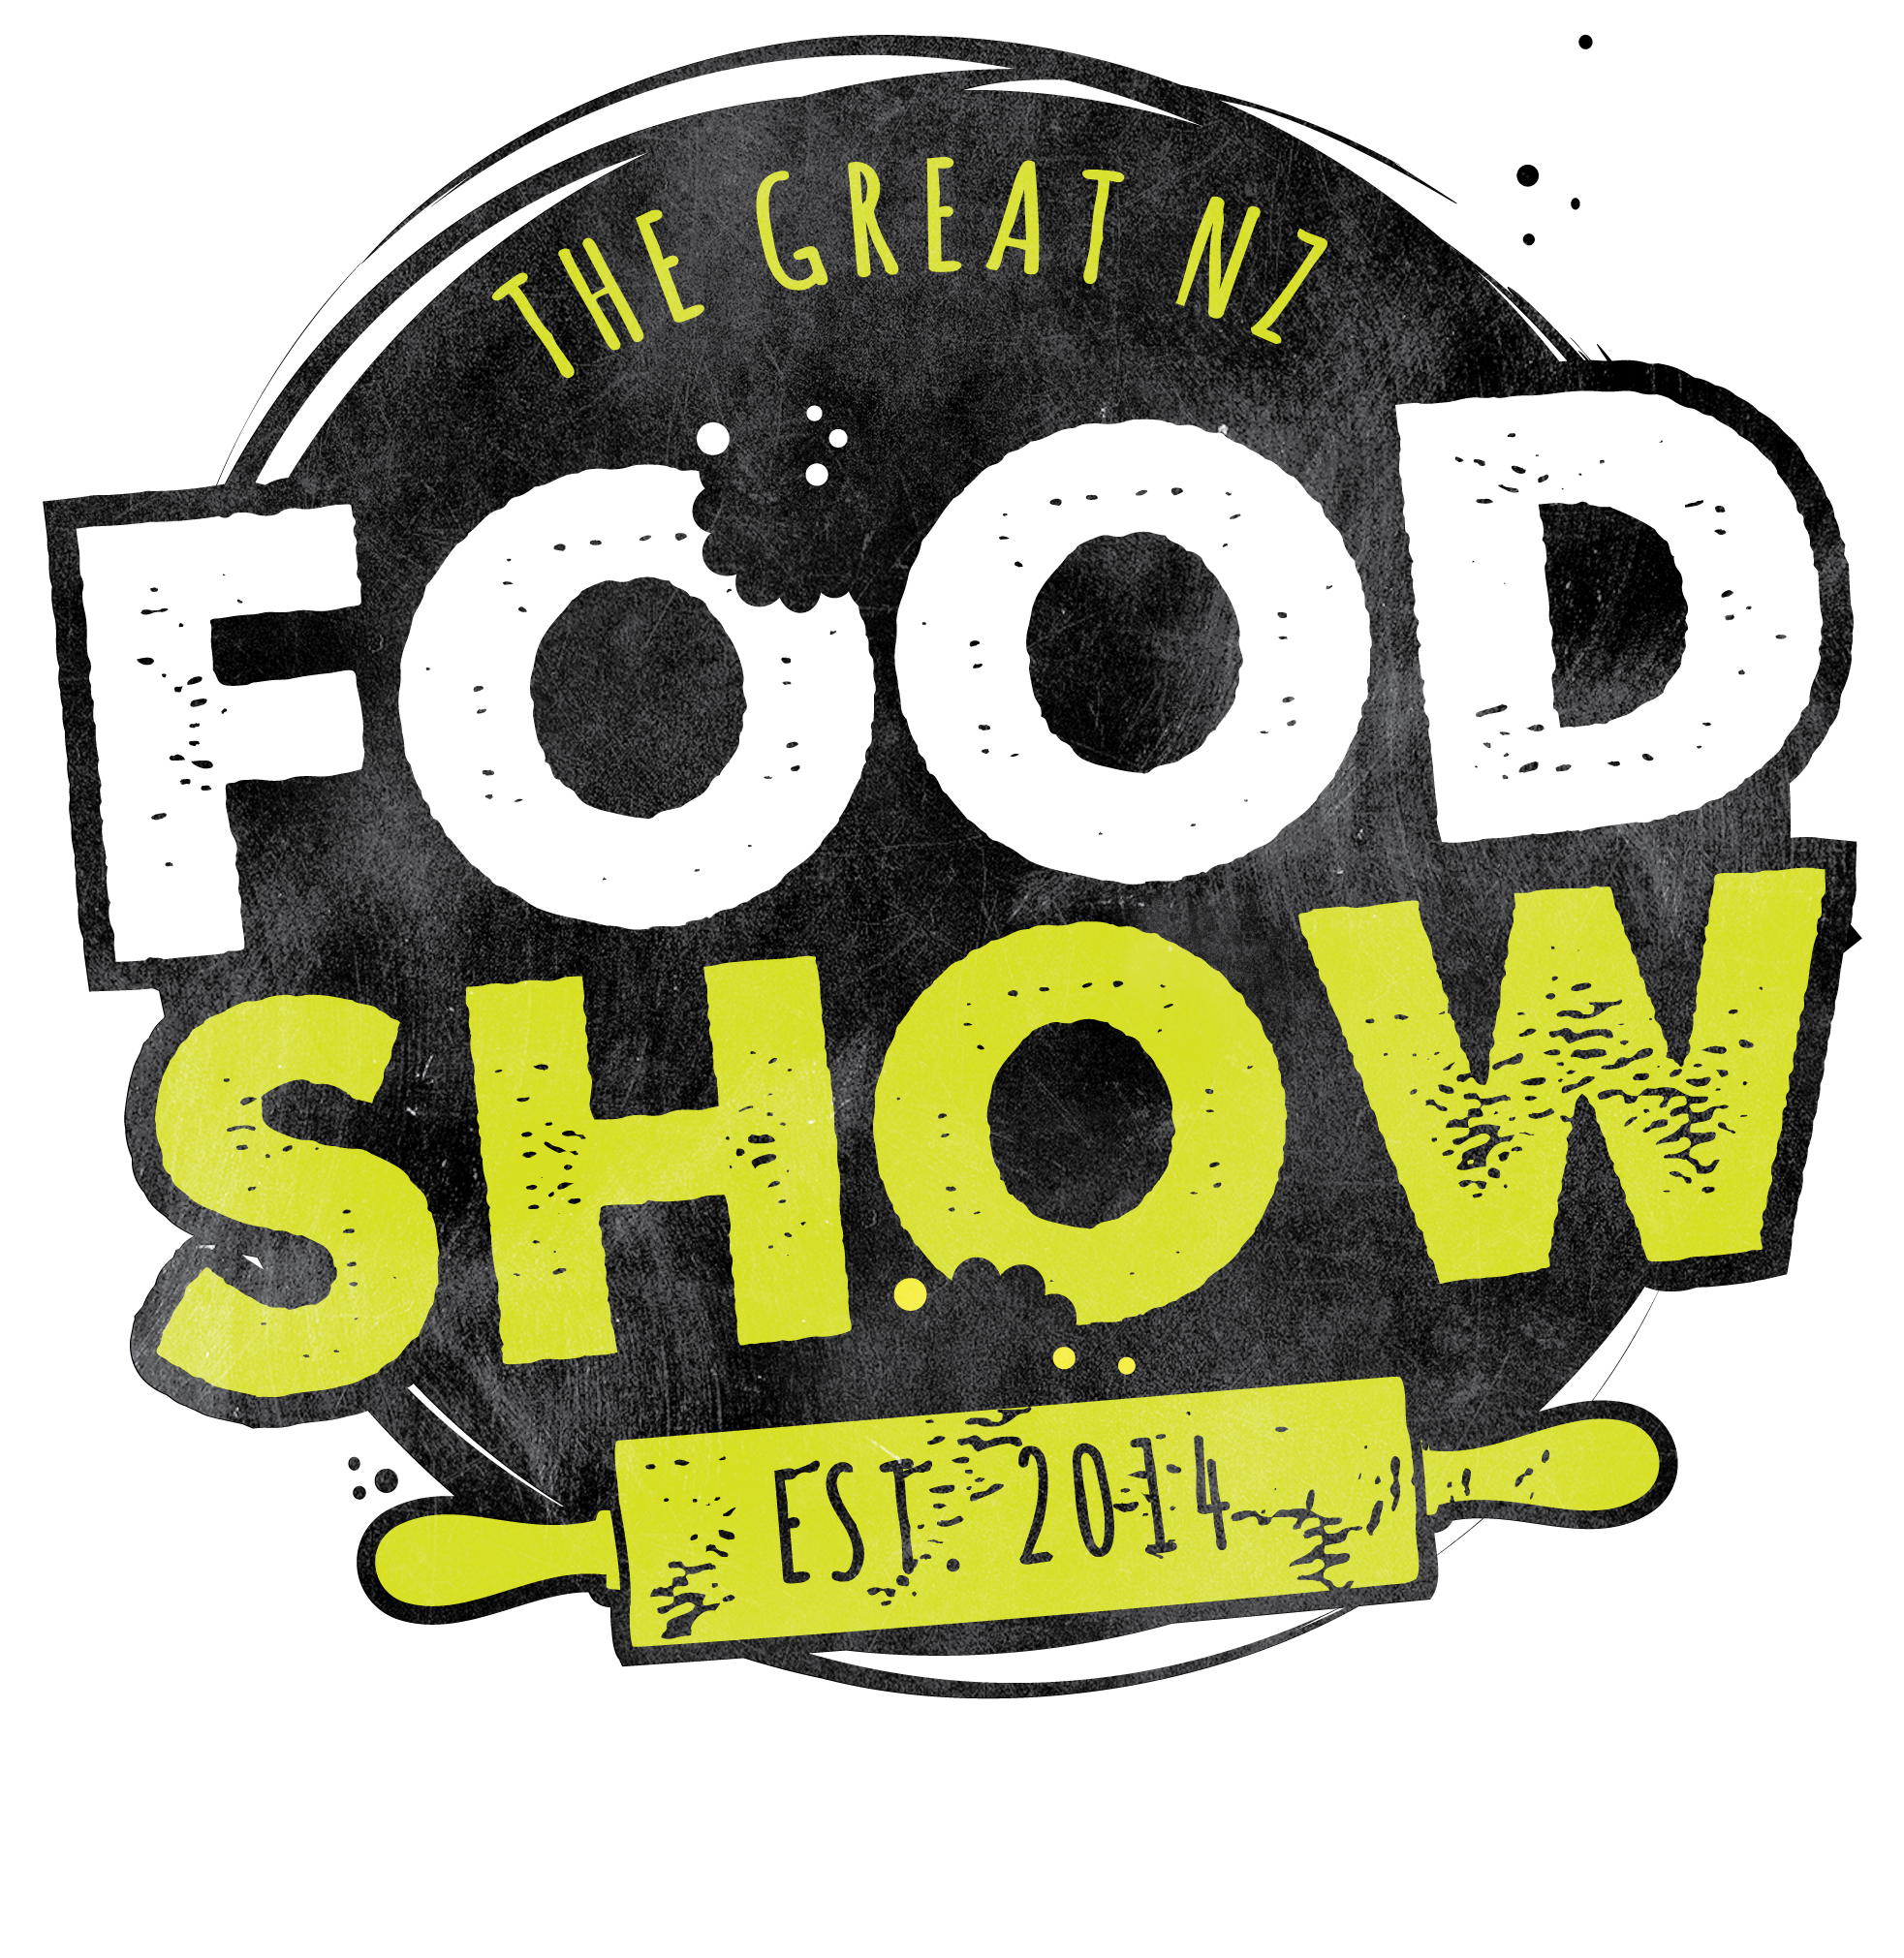 the great nz food show logo